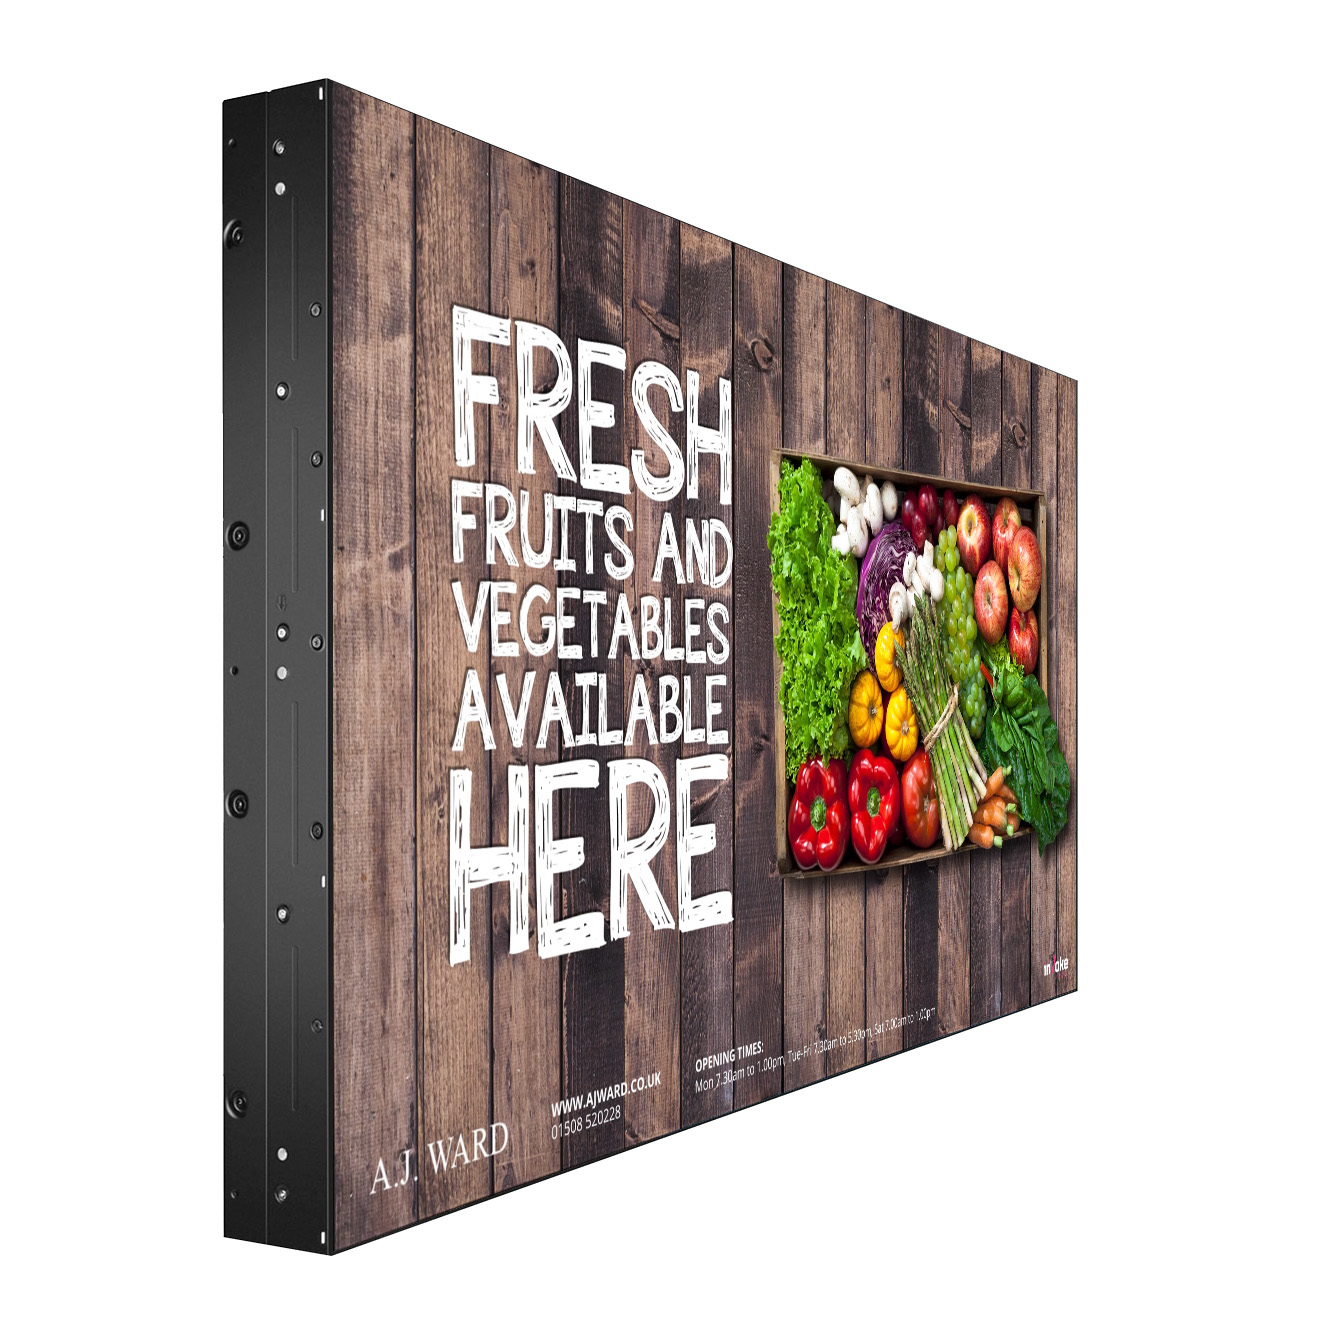 A J Ward video wall advertising fresh fruit and veg in store to draw customers in